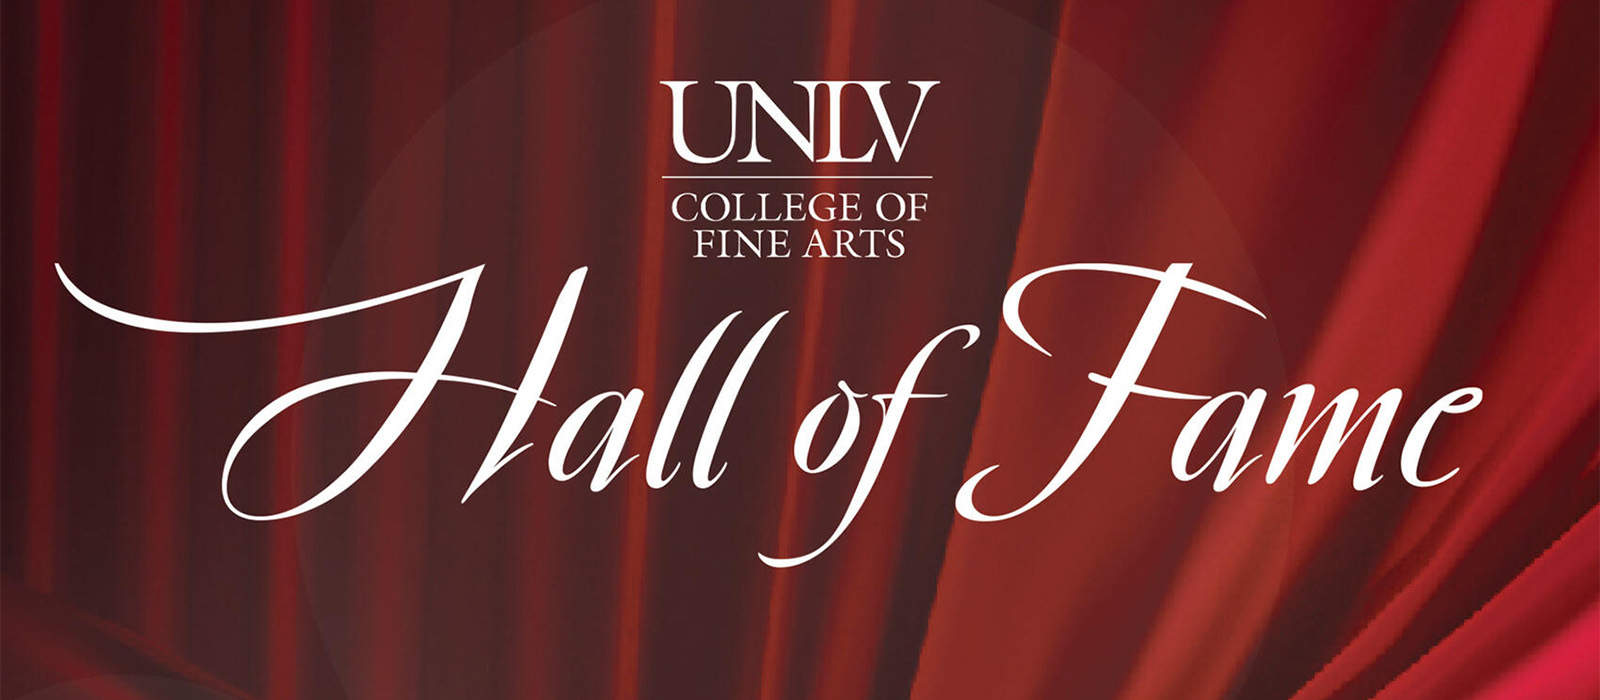 UNLVs Hall of Fame Celebrating Luminaries in the Arts banner